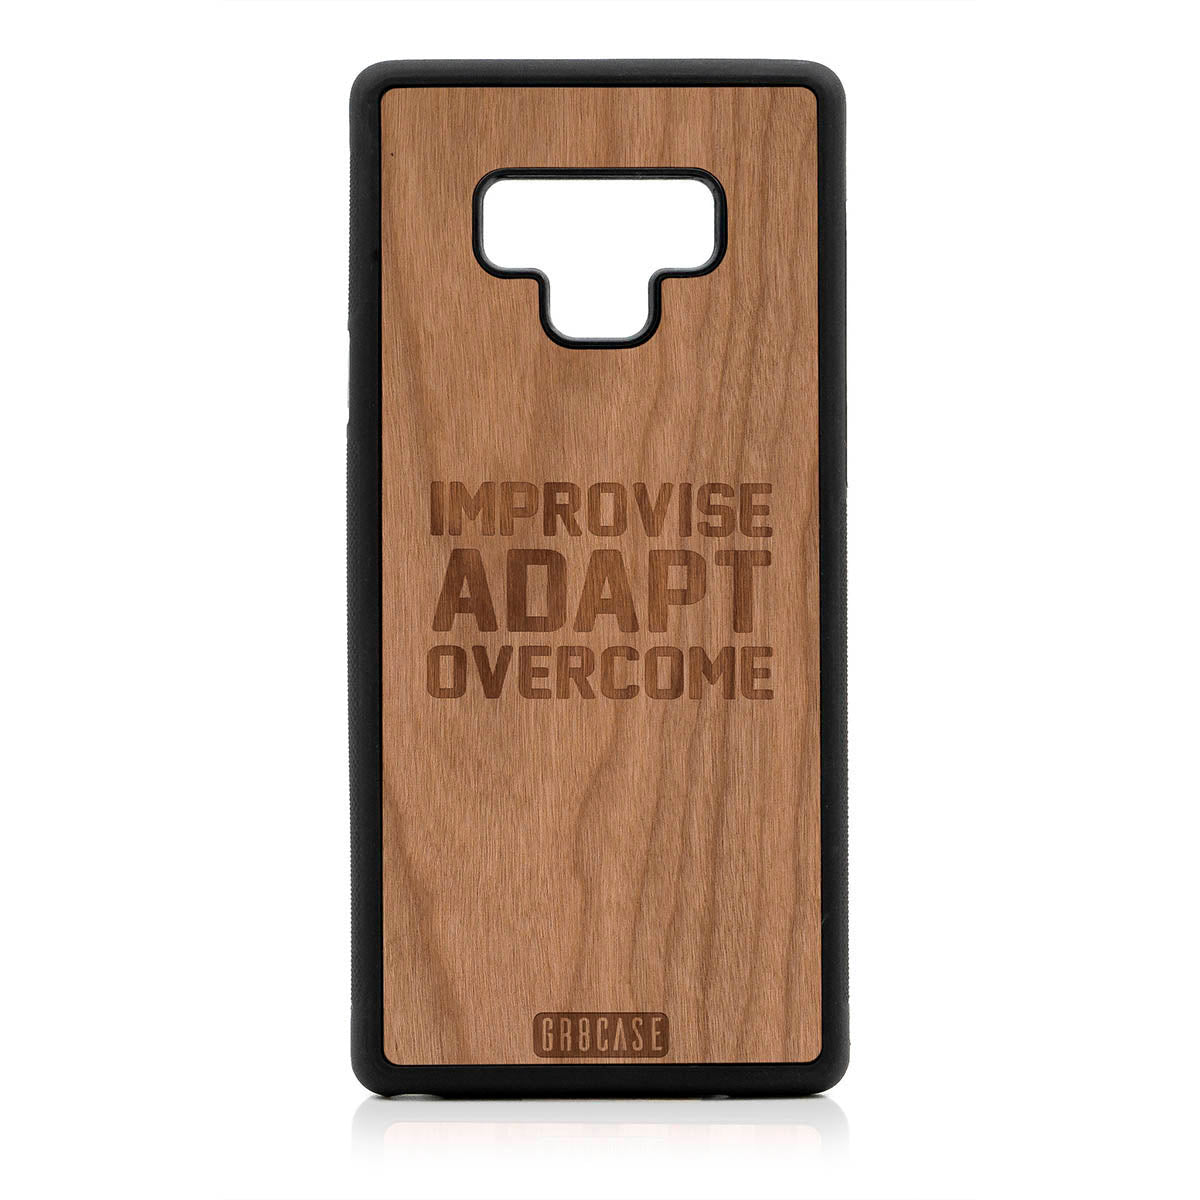 Improvise Adapt Overcome Design Wood Case For Samsung Galaxy Note 9